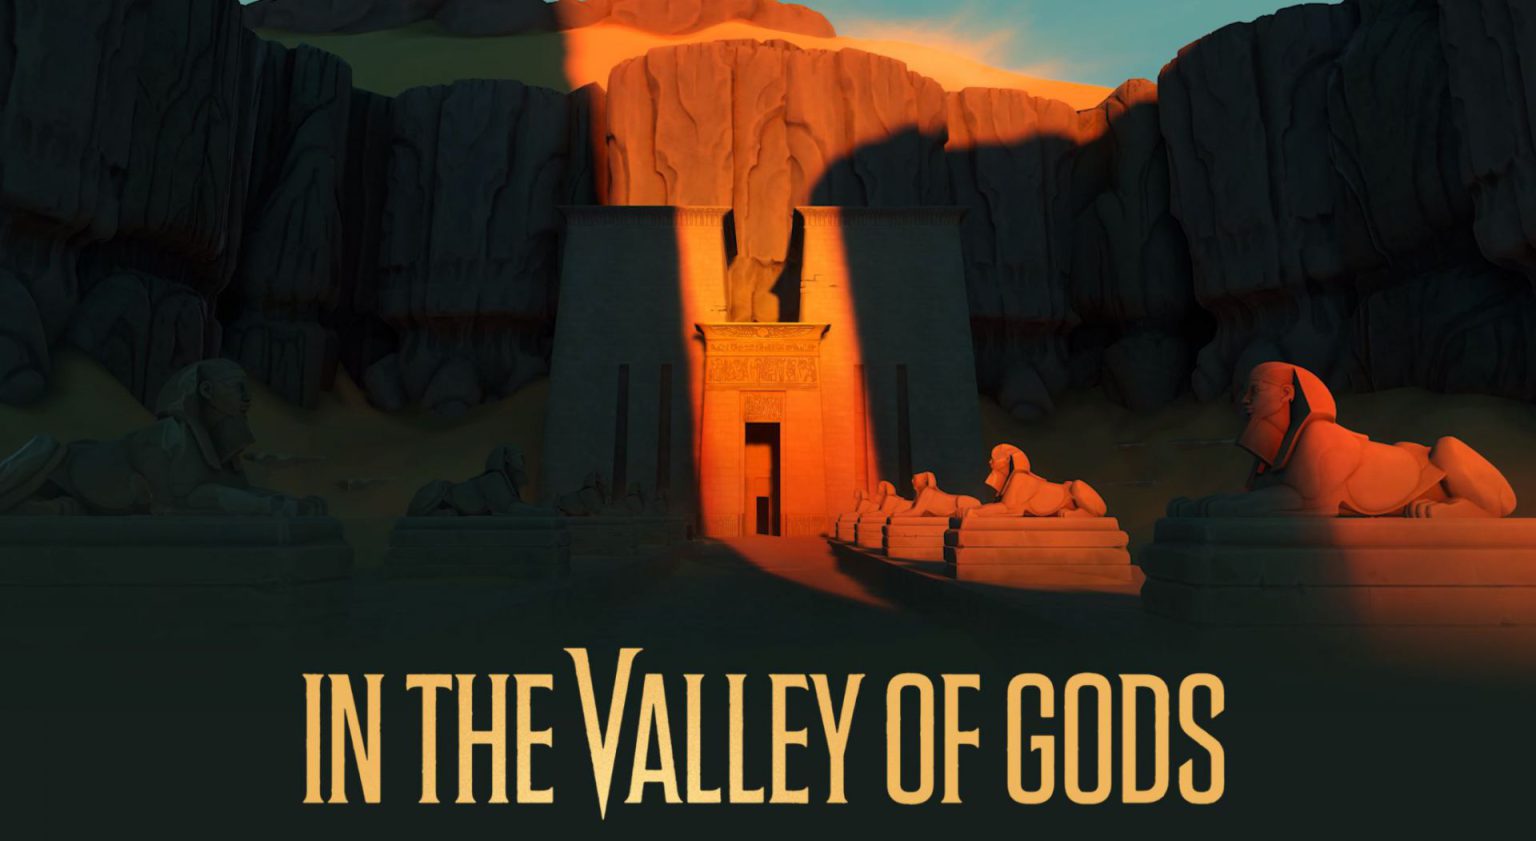 In the Valley of gods